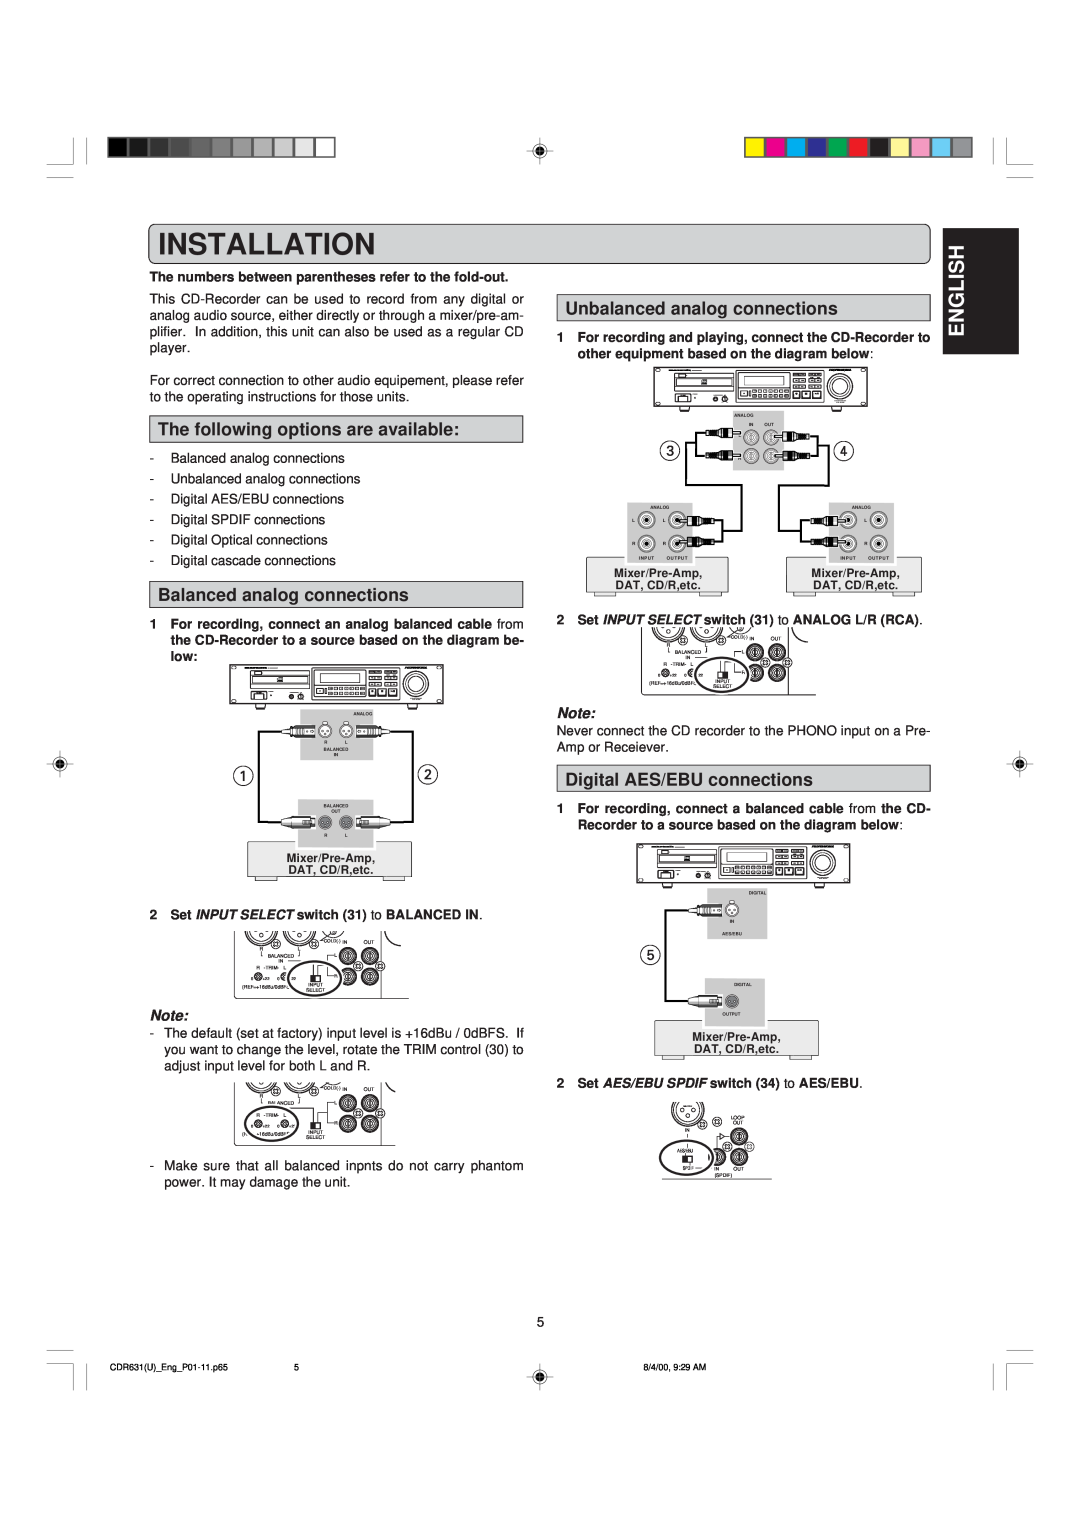 Marantz CDR631 manual Installation, English, The following options are available, Balanced analog connections 